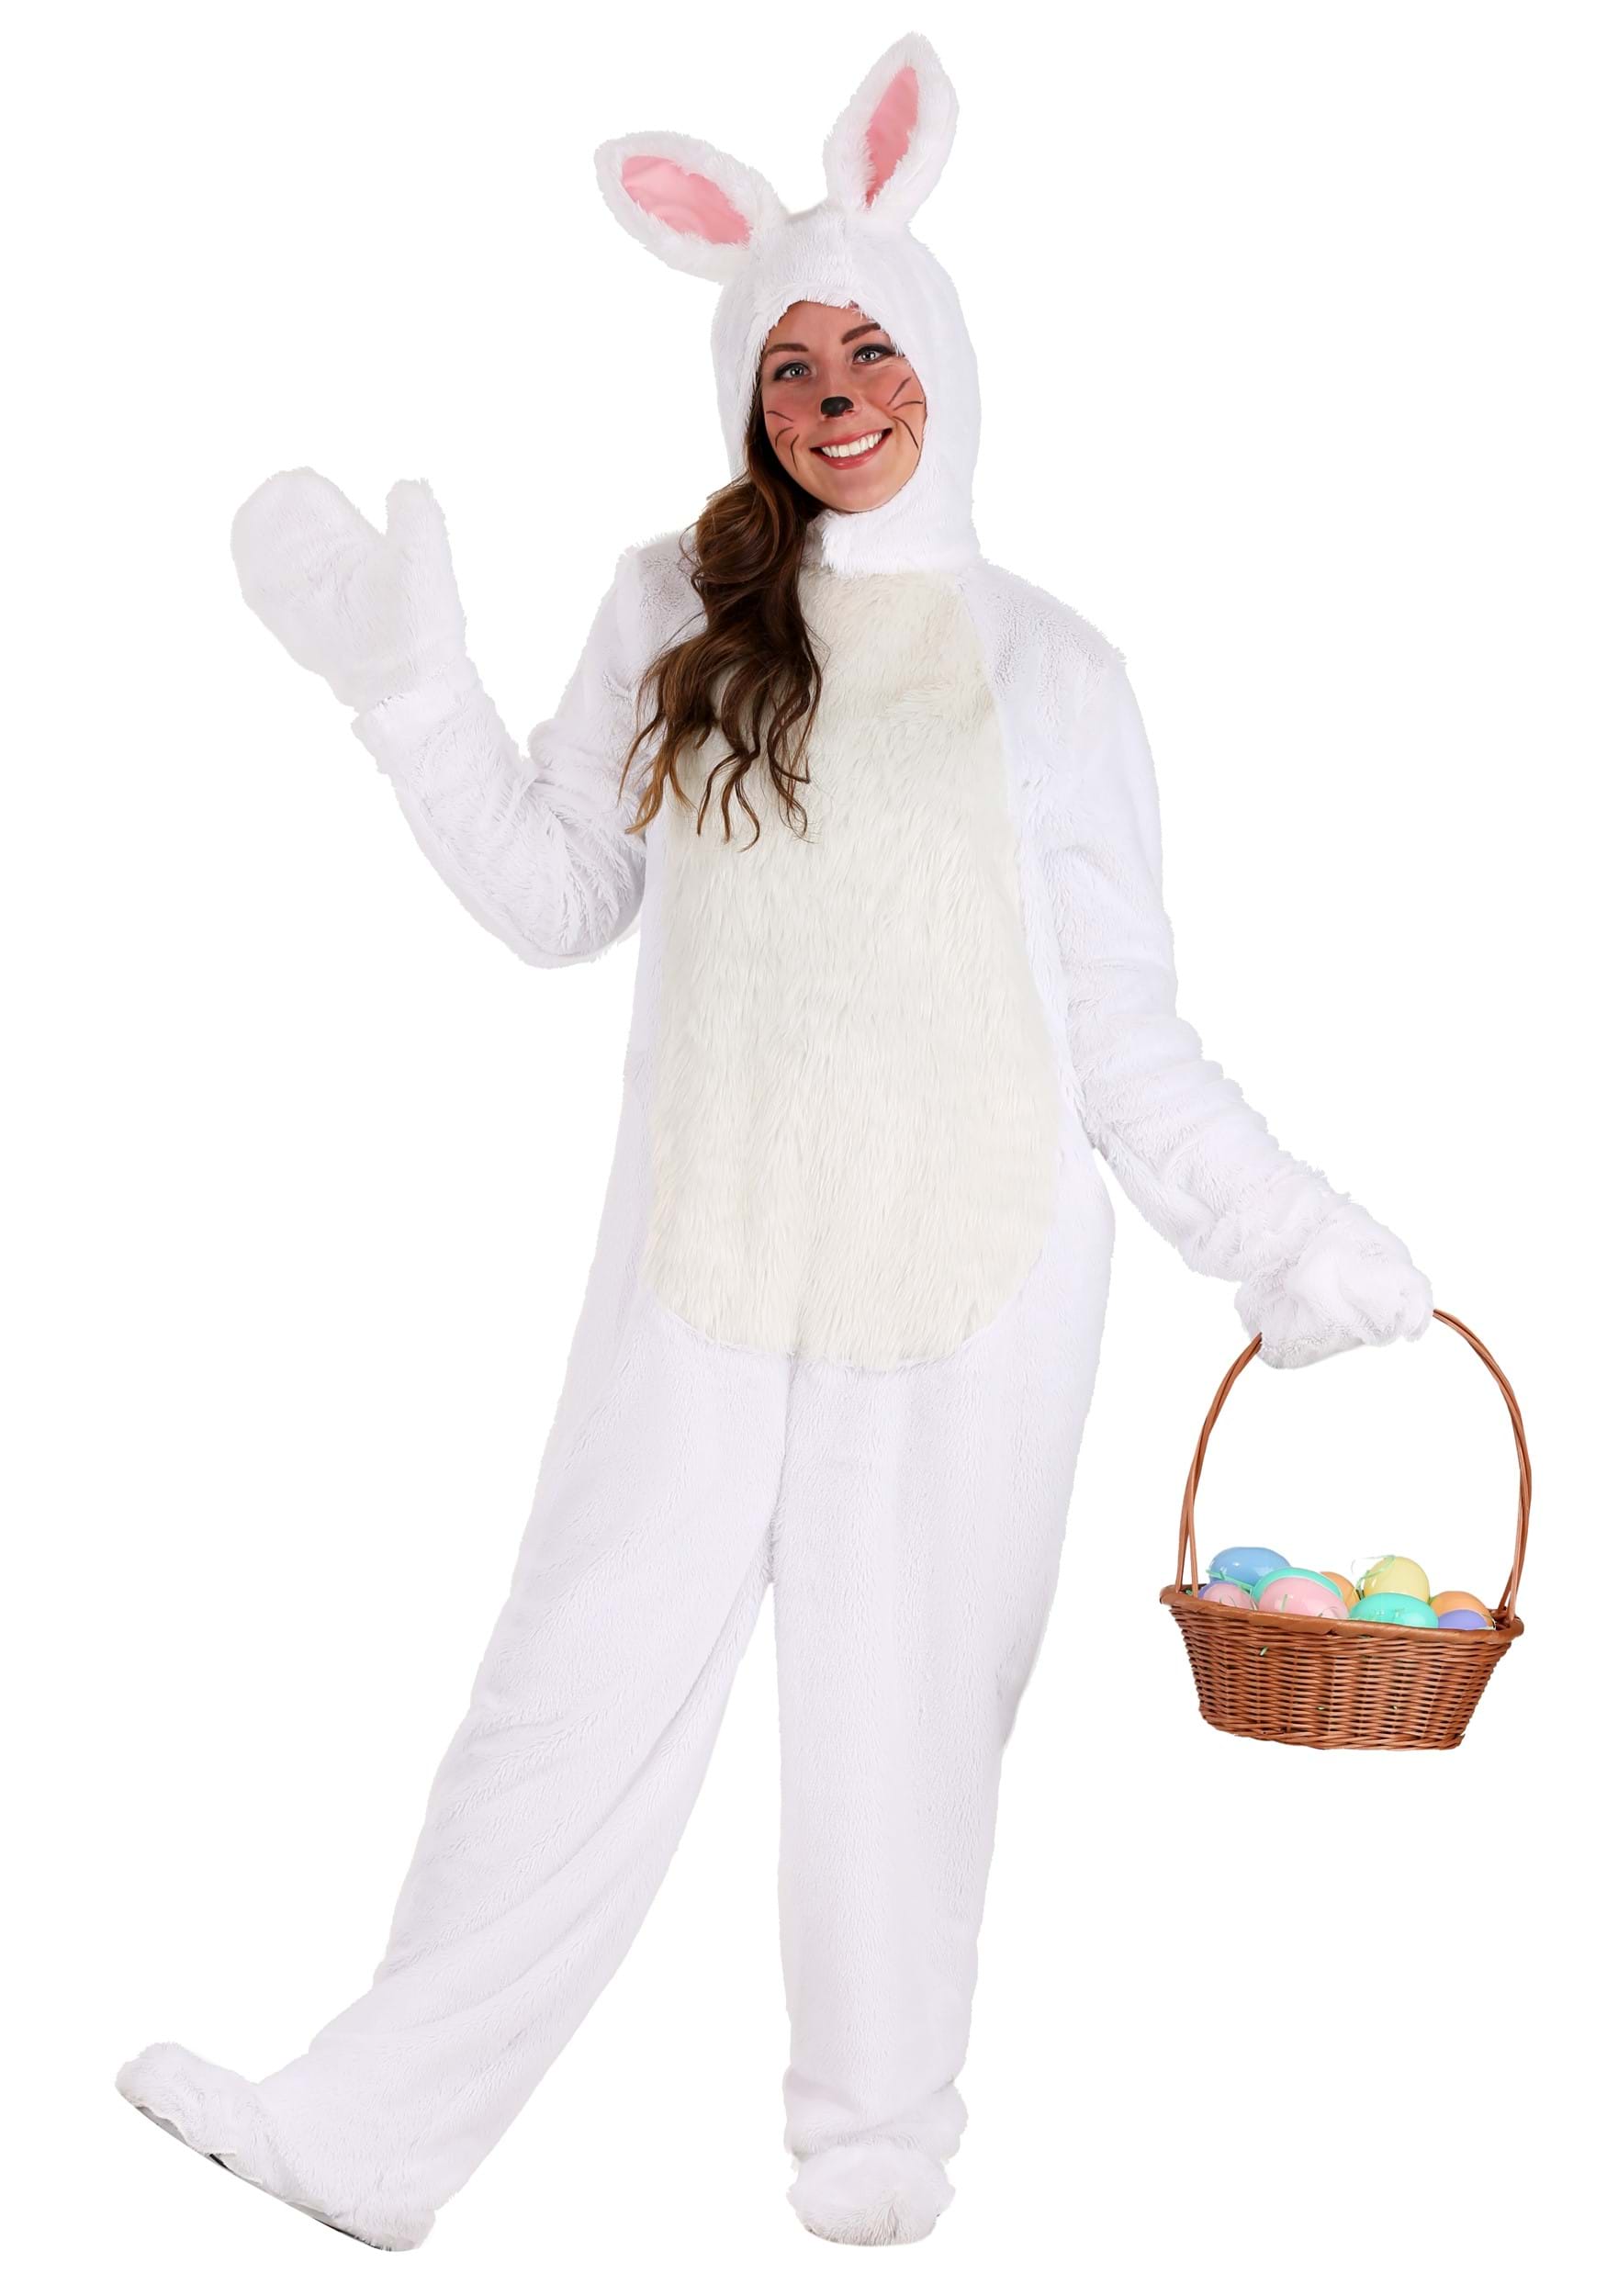 Photos - Fancy Dress FUN Costumes White Bunny Adult Costume Pink/White FUN1603AD